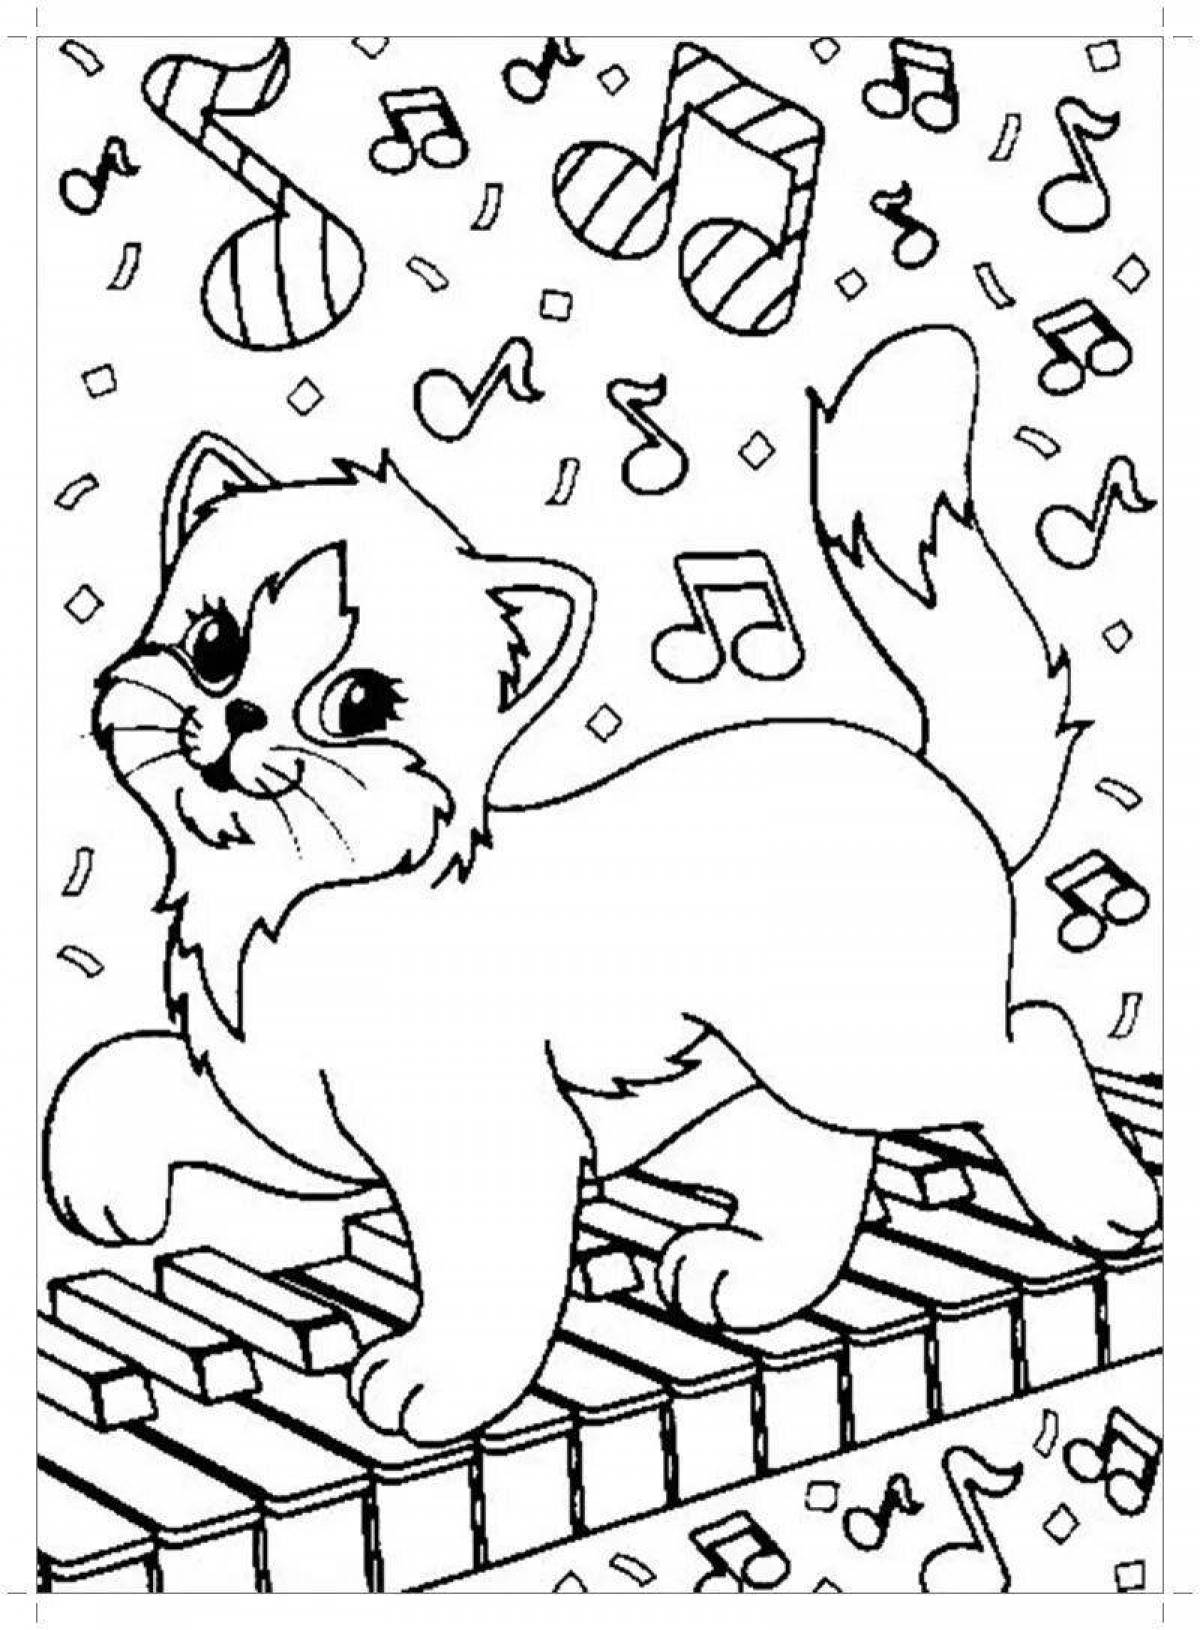 Gorgeous kitty coloring book for kids 6-7 years old